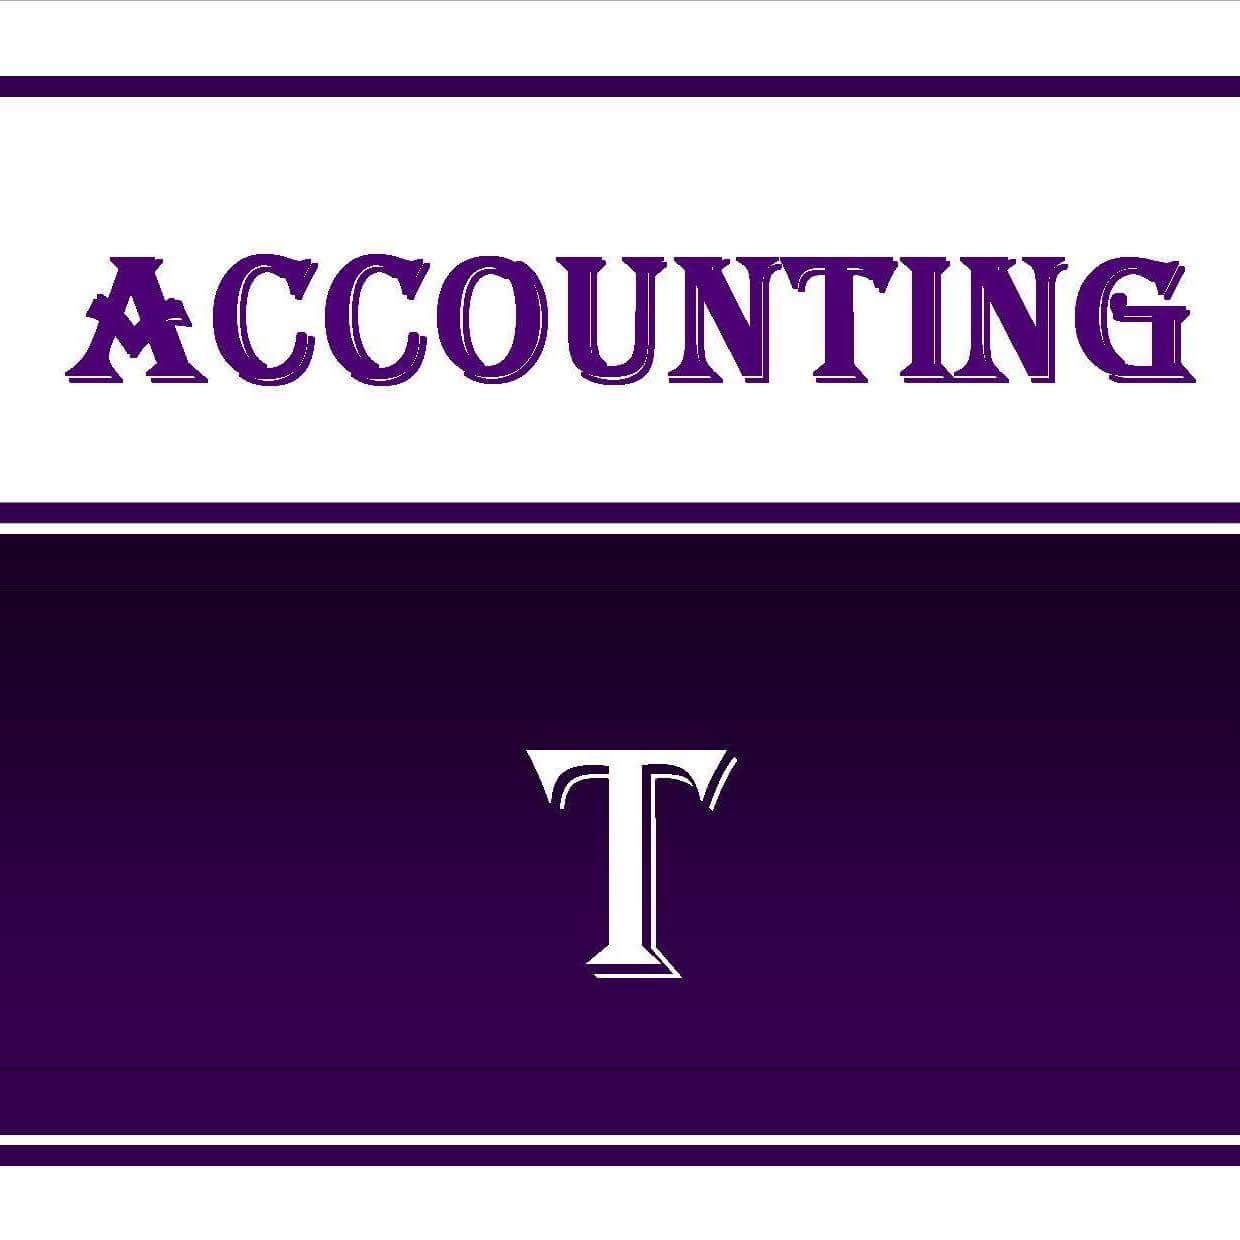 Accounting T